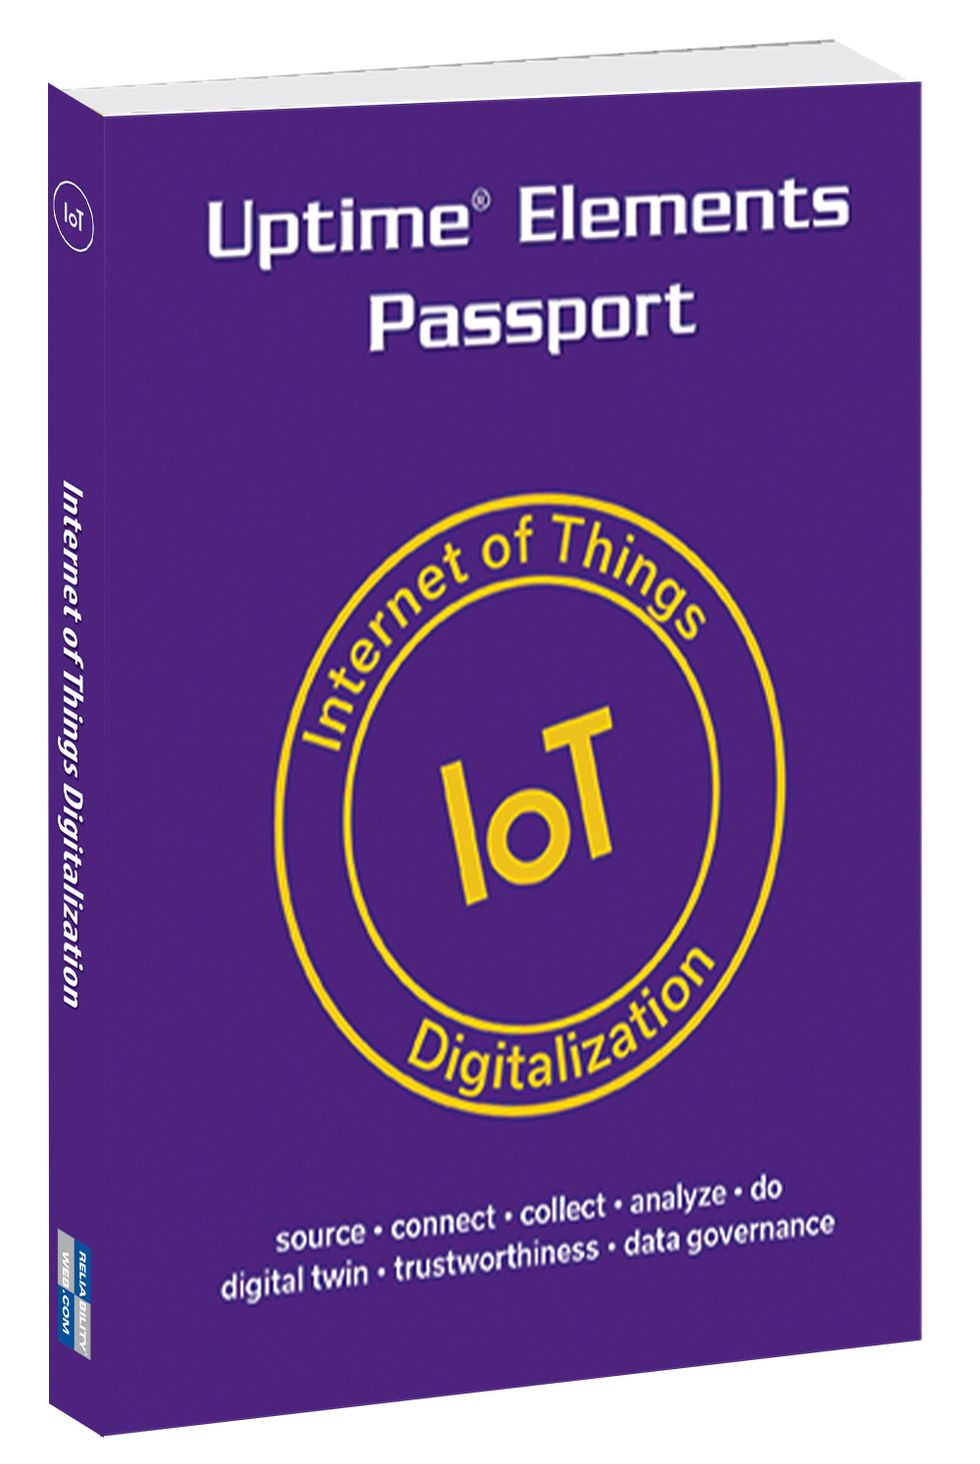  Uptime Elements Internet of Things (IoT) and Digitalization Framework Passport 